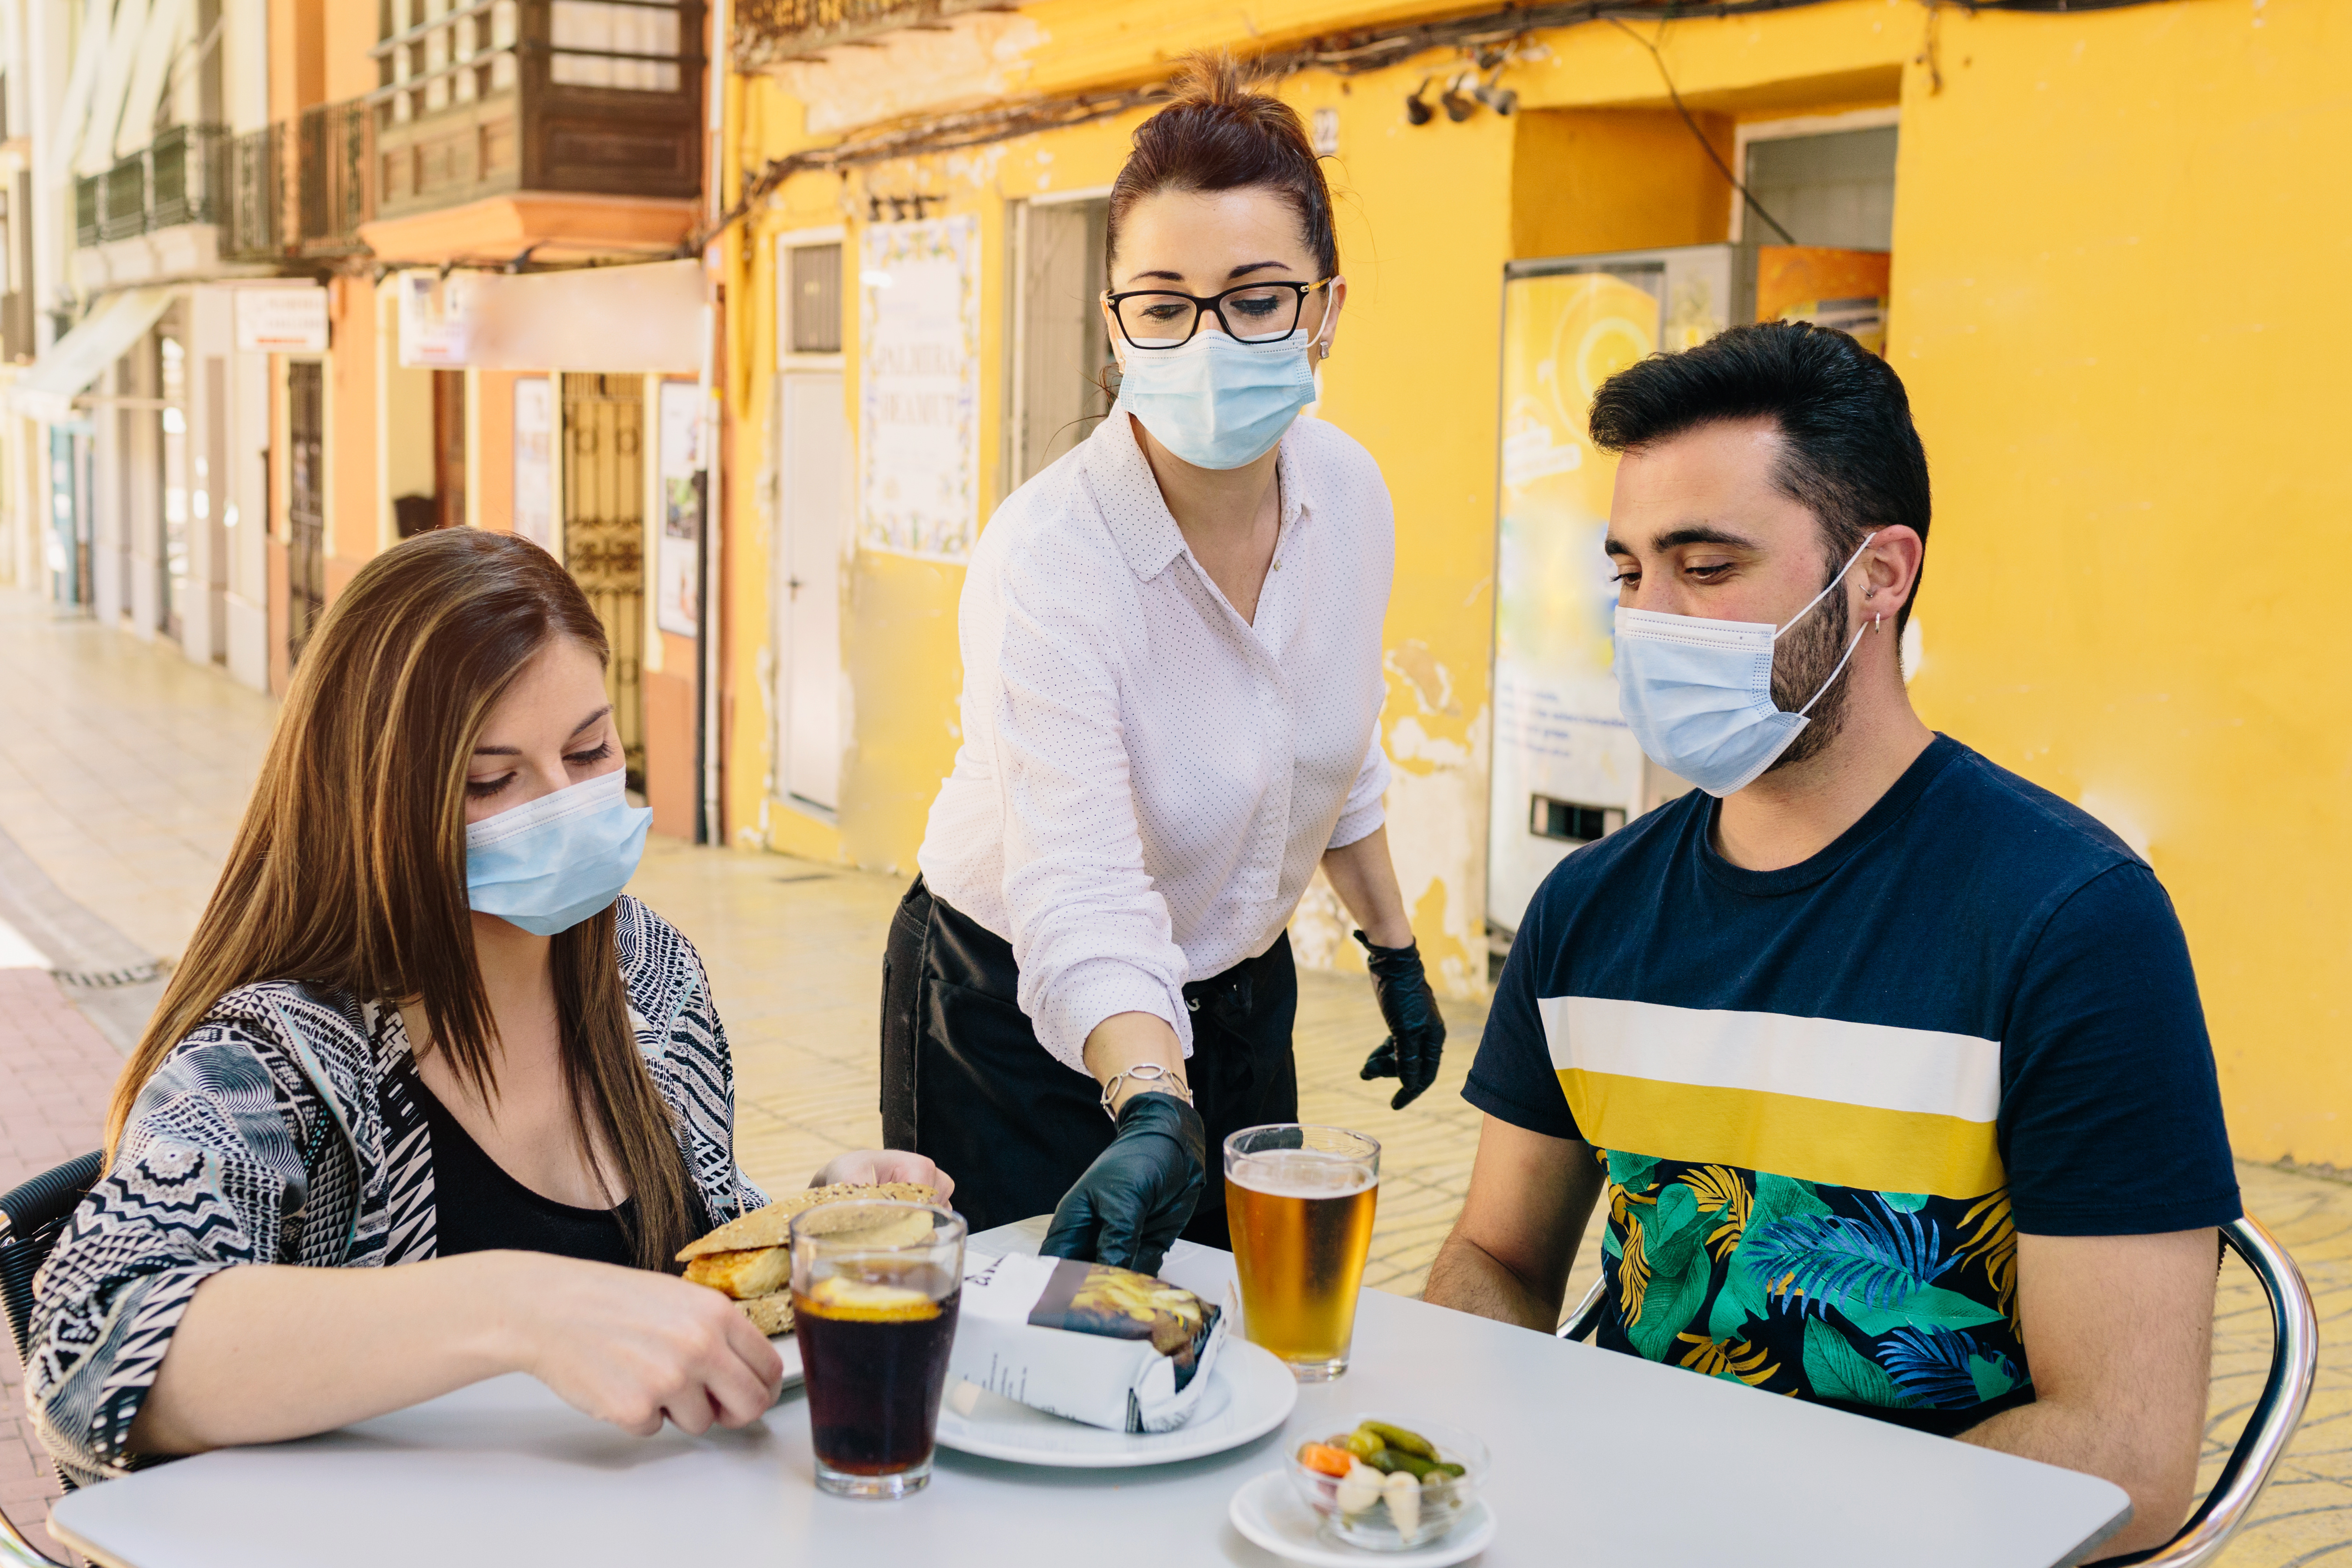 A waitress sets a plate between two customers seated at an outdoor table.  All three people wear surgical masks; the waitress also wears gloves.